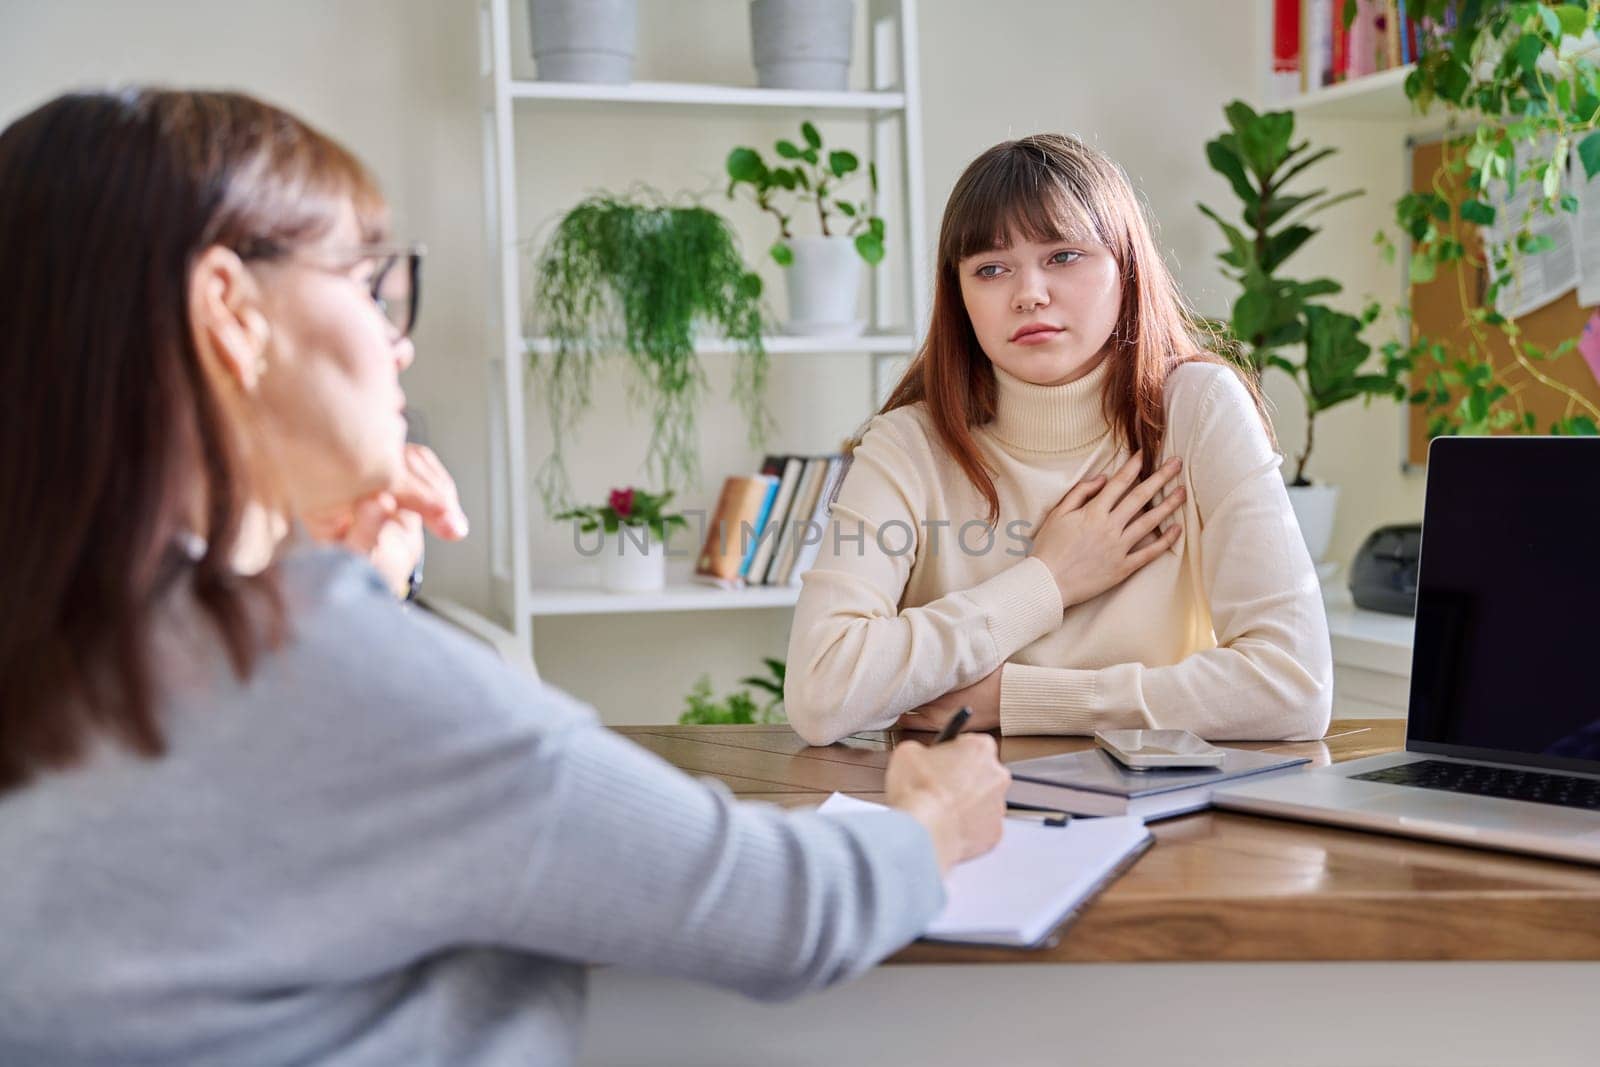 Sad upset teenage girl talking to psychotherapist psychologist counselor at therapy session in specialist office. Mental health of youth, social services for mental support, psychological counseling